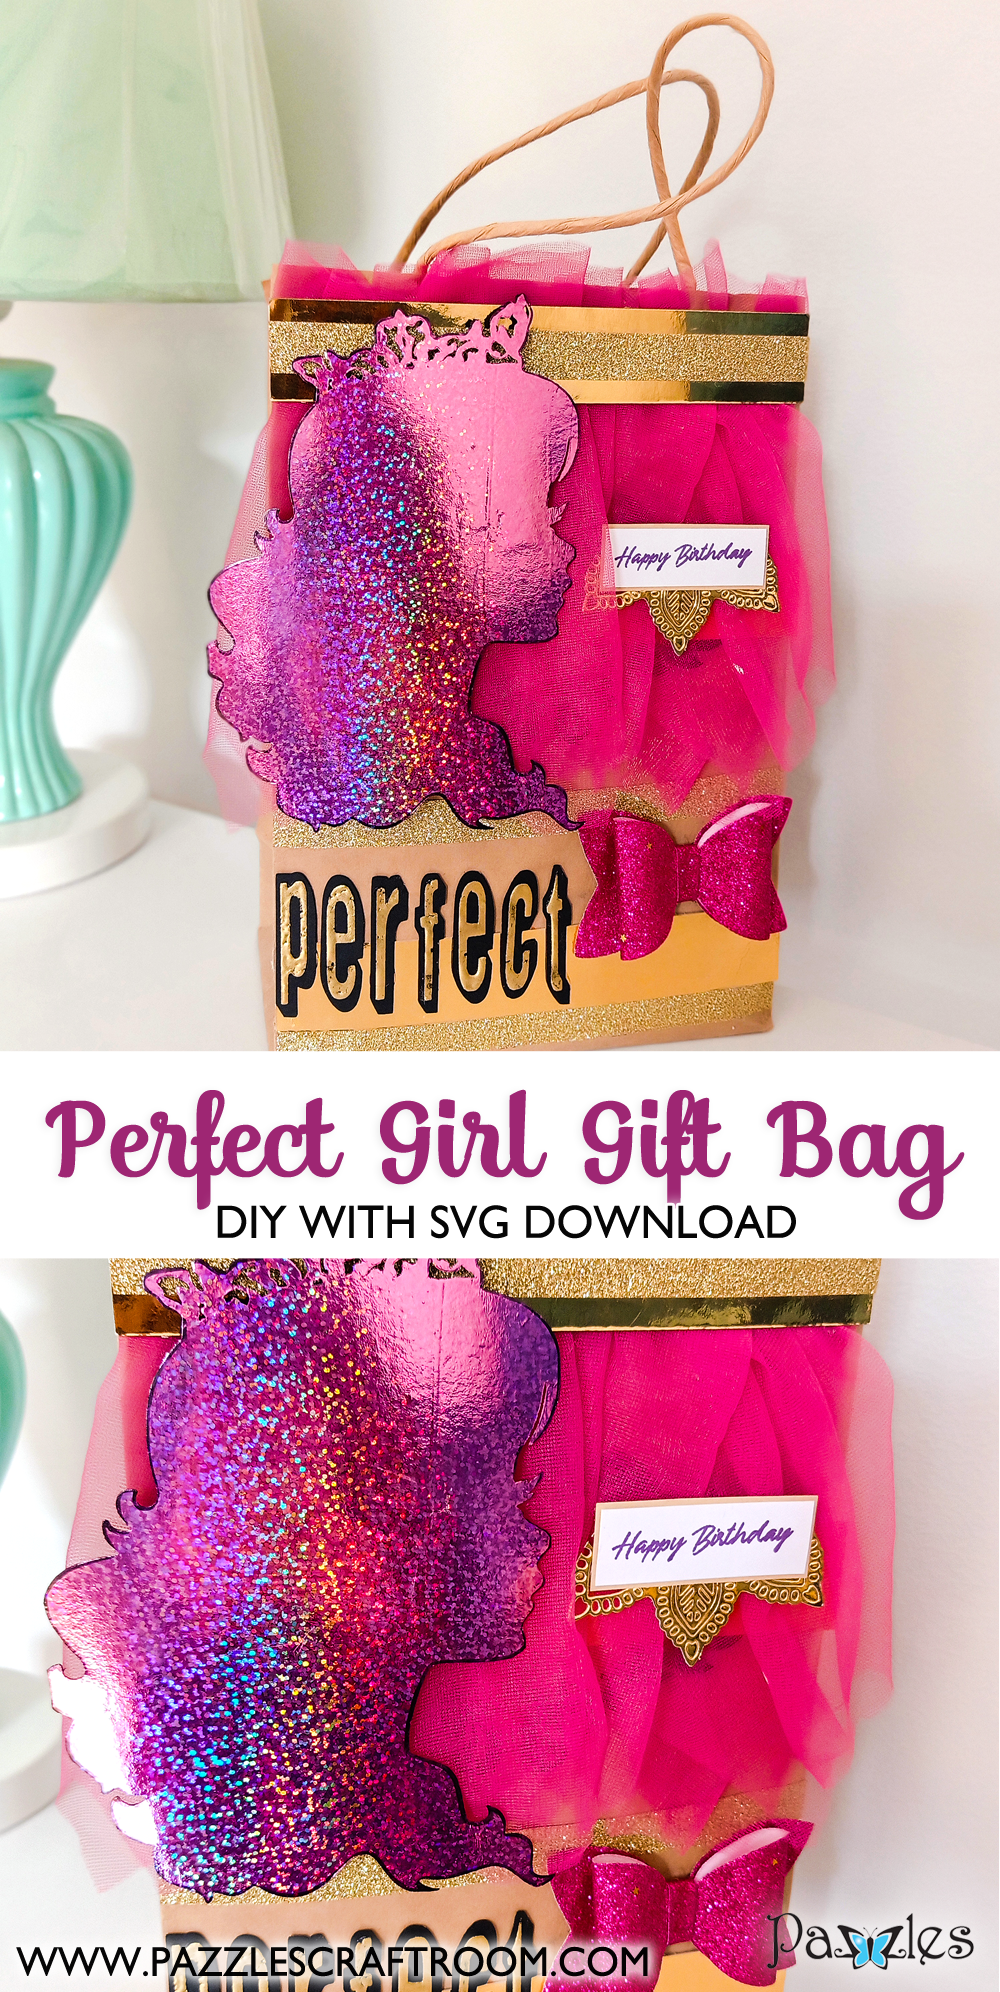 Pazzles DIY Perfect Girl Gift Bag with instant SVG download. Instant SVG download compatible with all major electronic cutters including Pazzles Inspiration, Cricut, and Silhouette Cameo. Design by Zahraa Darweesh.